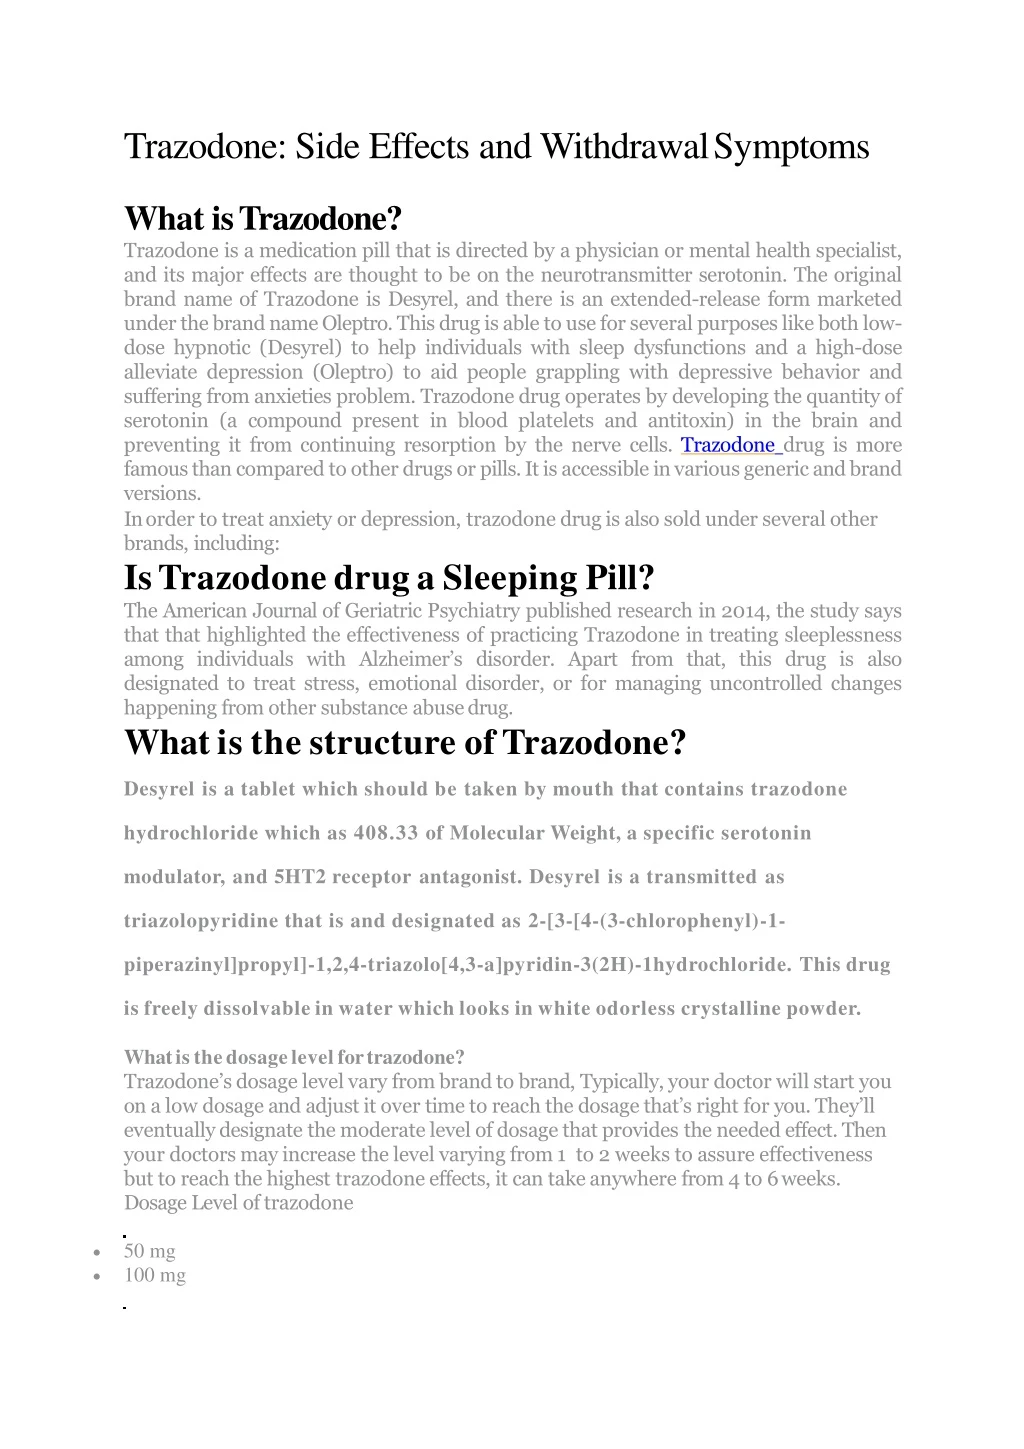 trazodone side effects and withdrawal symptoms